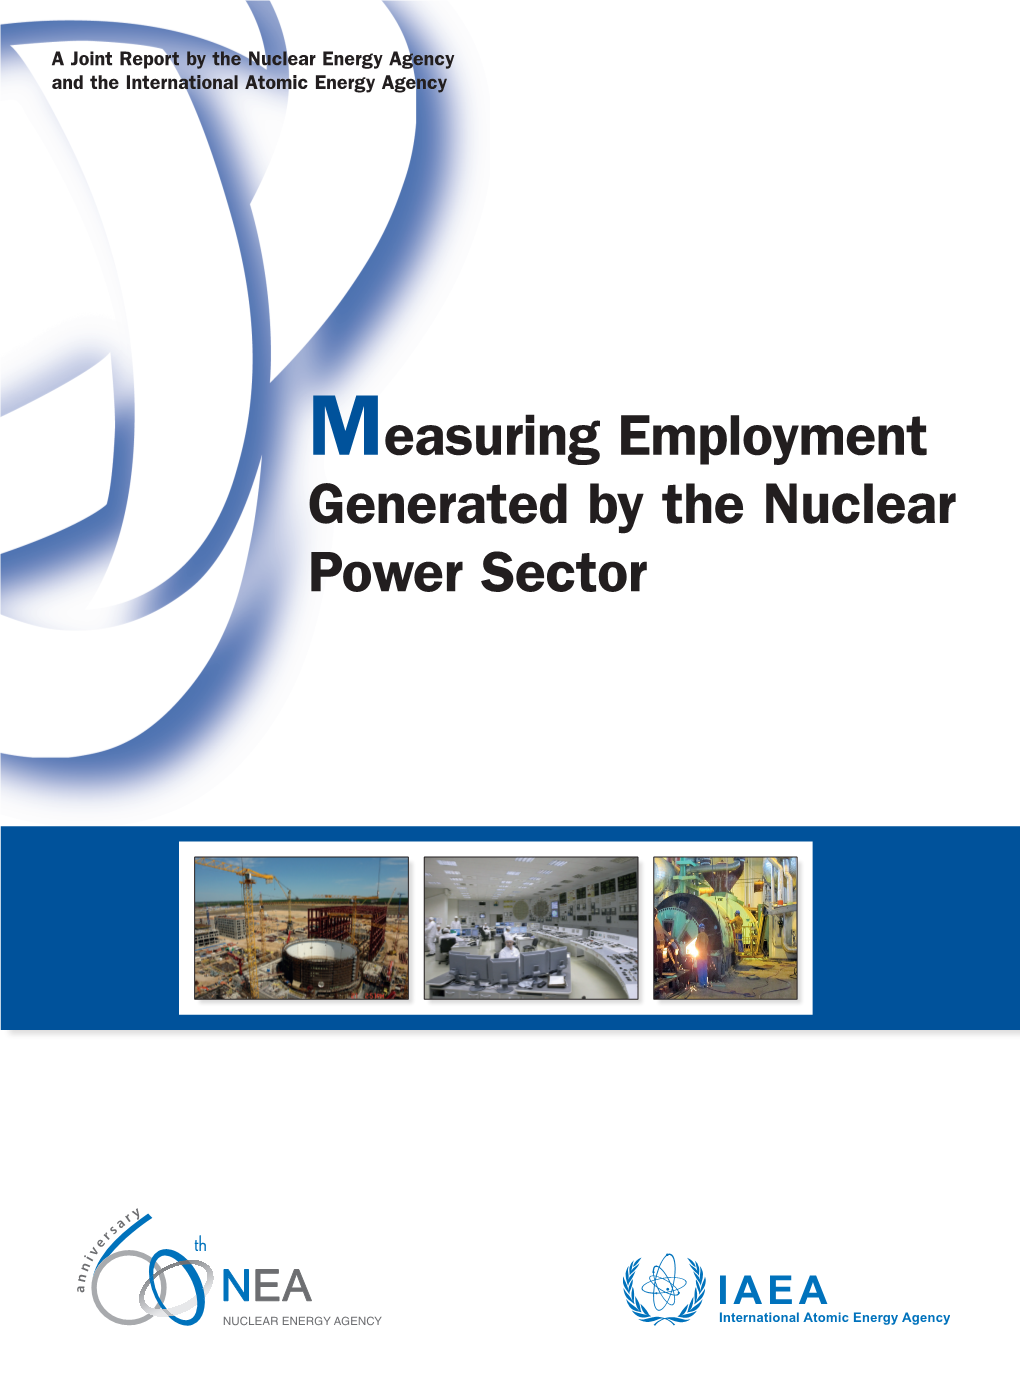 Measuring Employment Generated by the Nuclear Power Sector